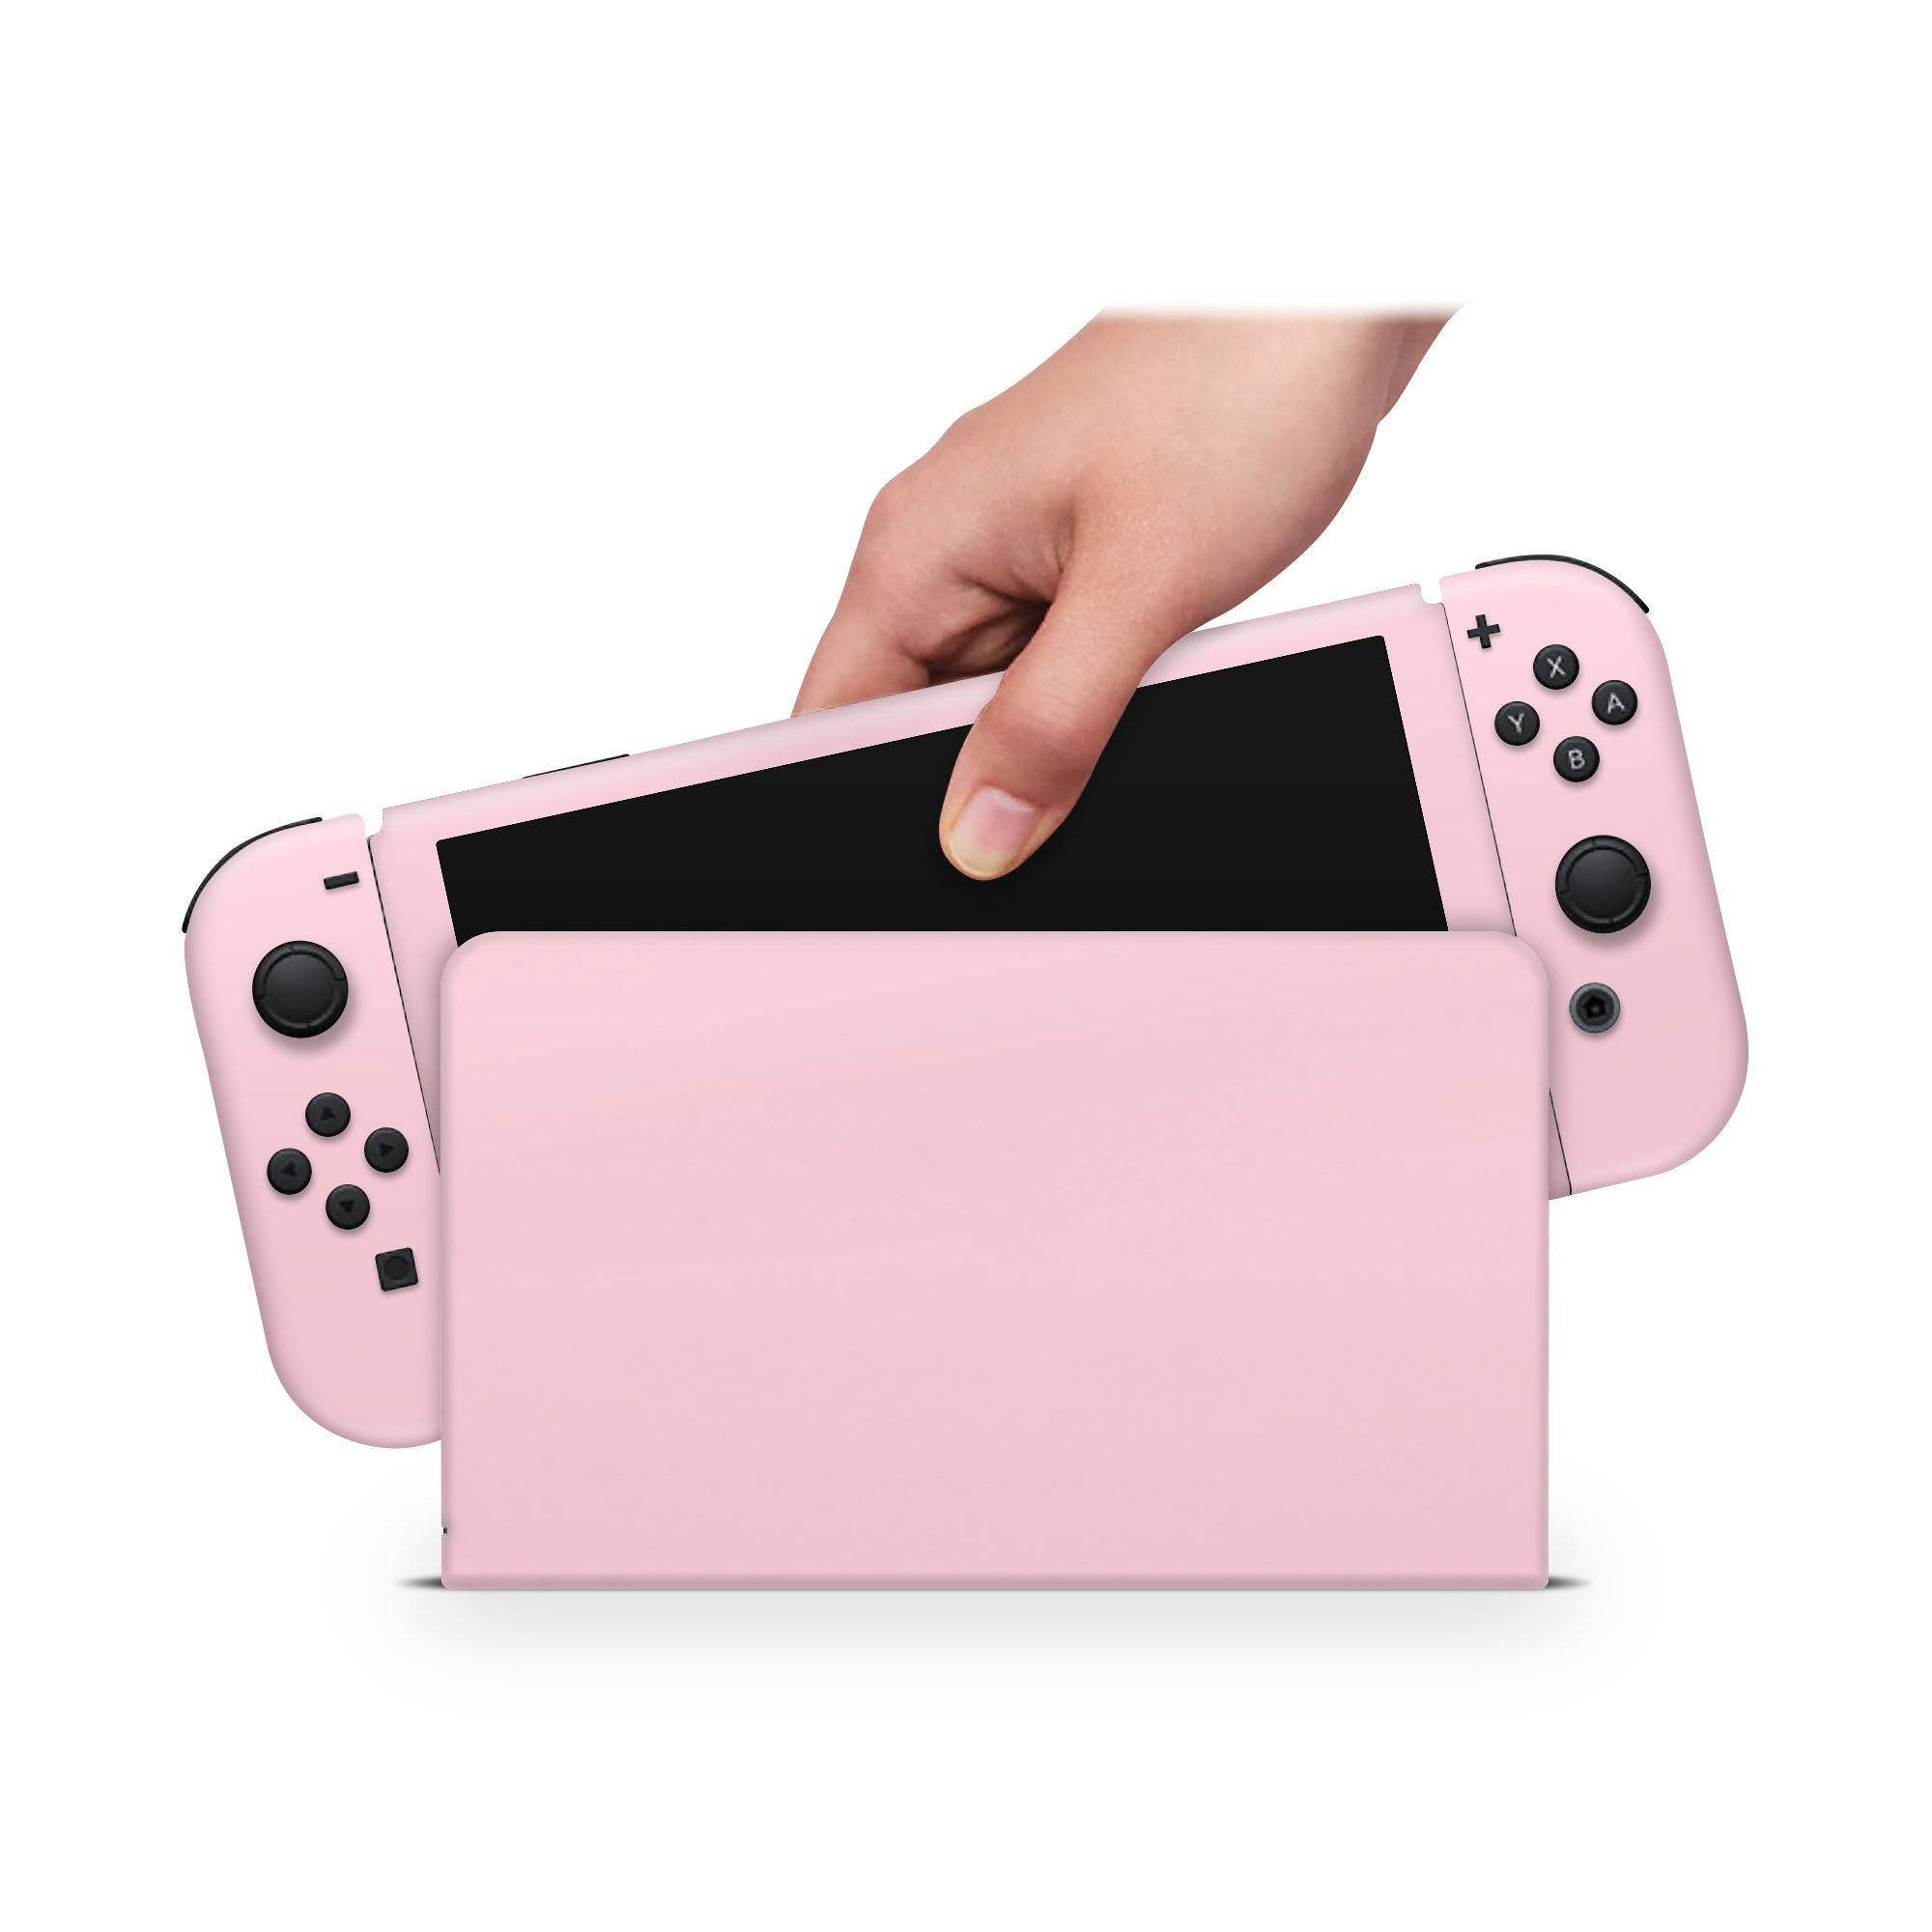 Oled Nintendo Switch Skin Decals Solid Pink Wrap Vinyl - Etsy